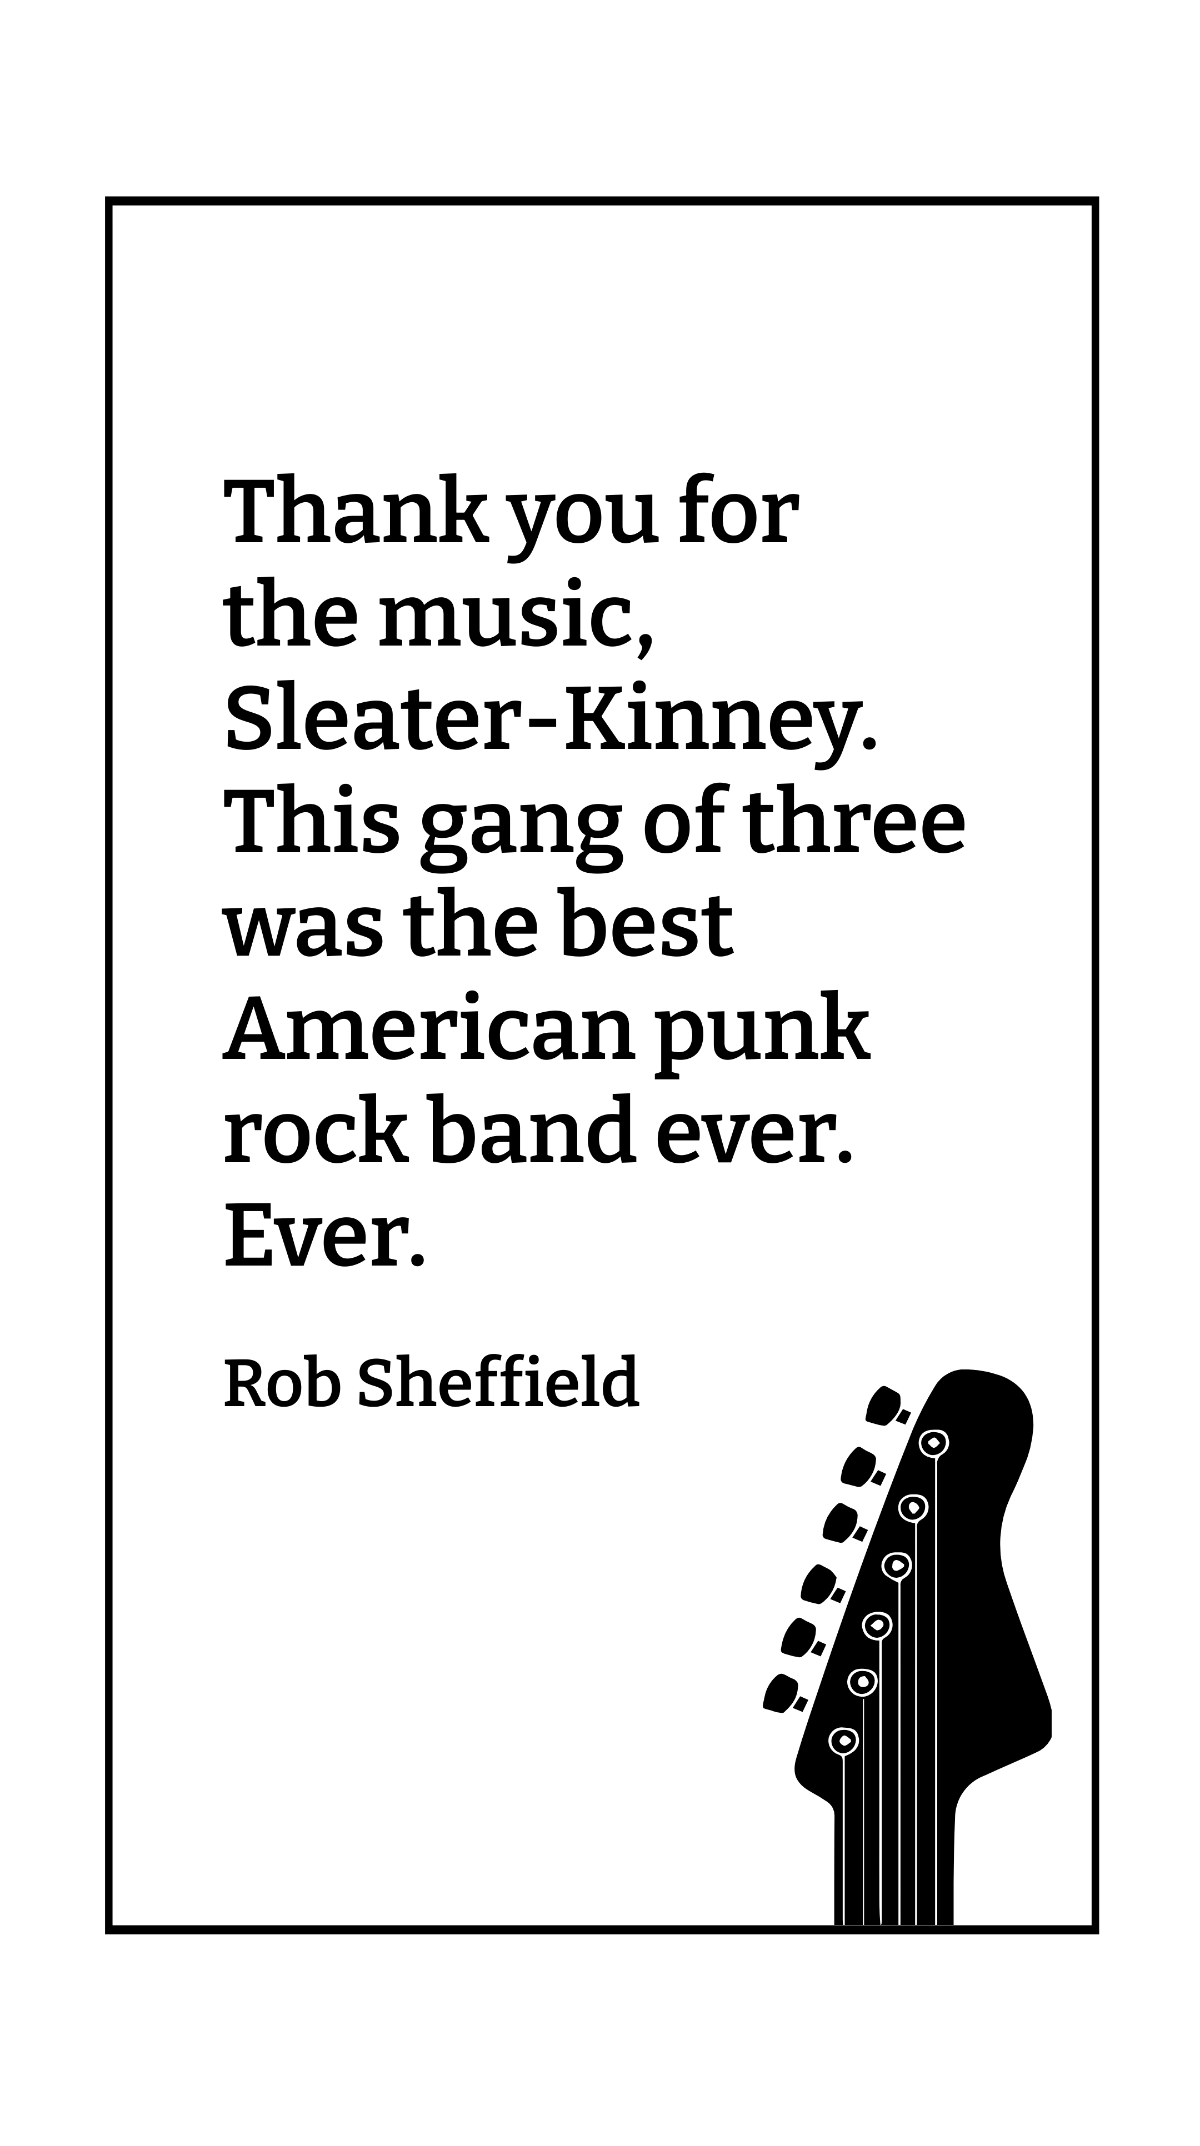 Rob Sheffield - Thank you for the music, Sleater-Kinney. This gang of three was the best American punk rock band ever. Ever. Template